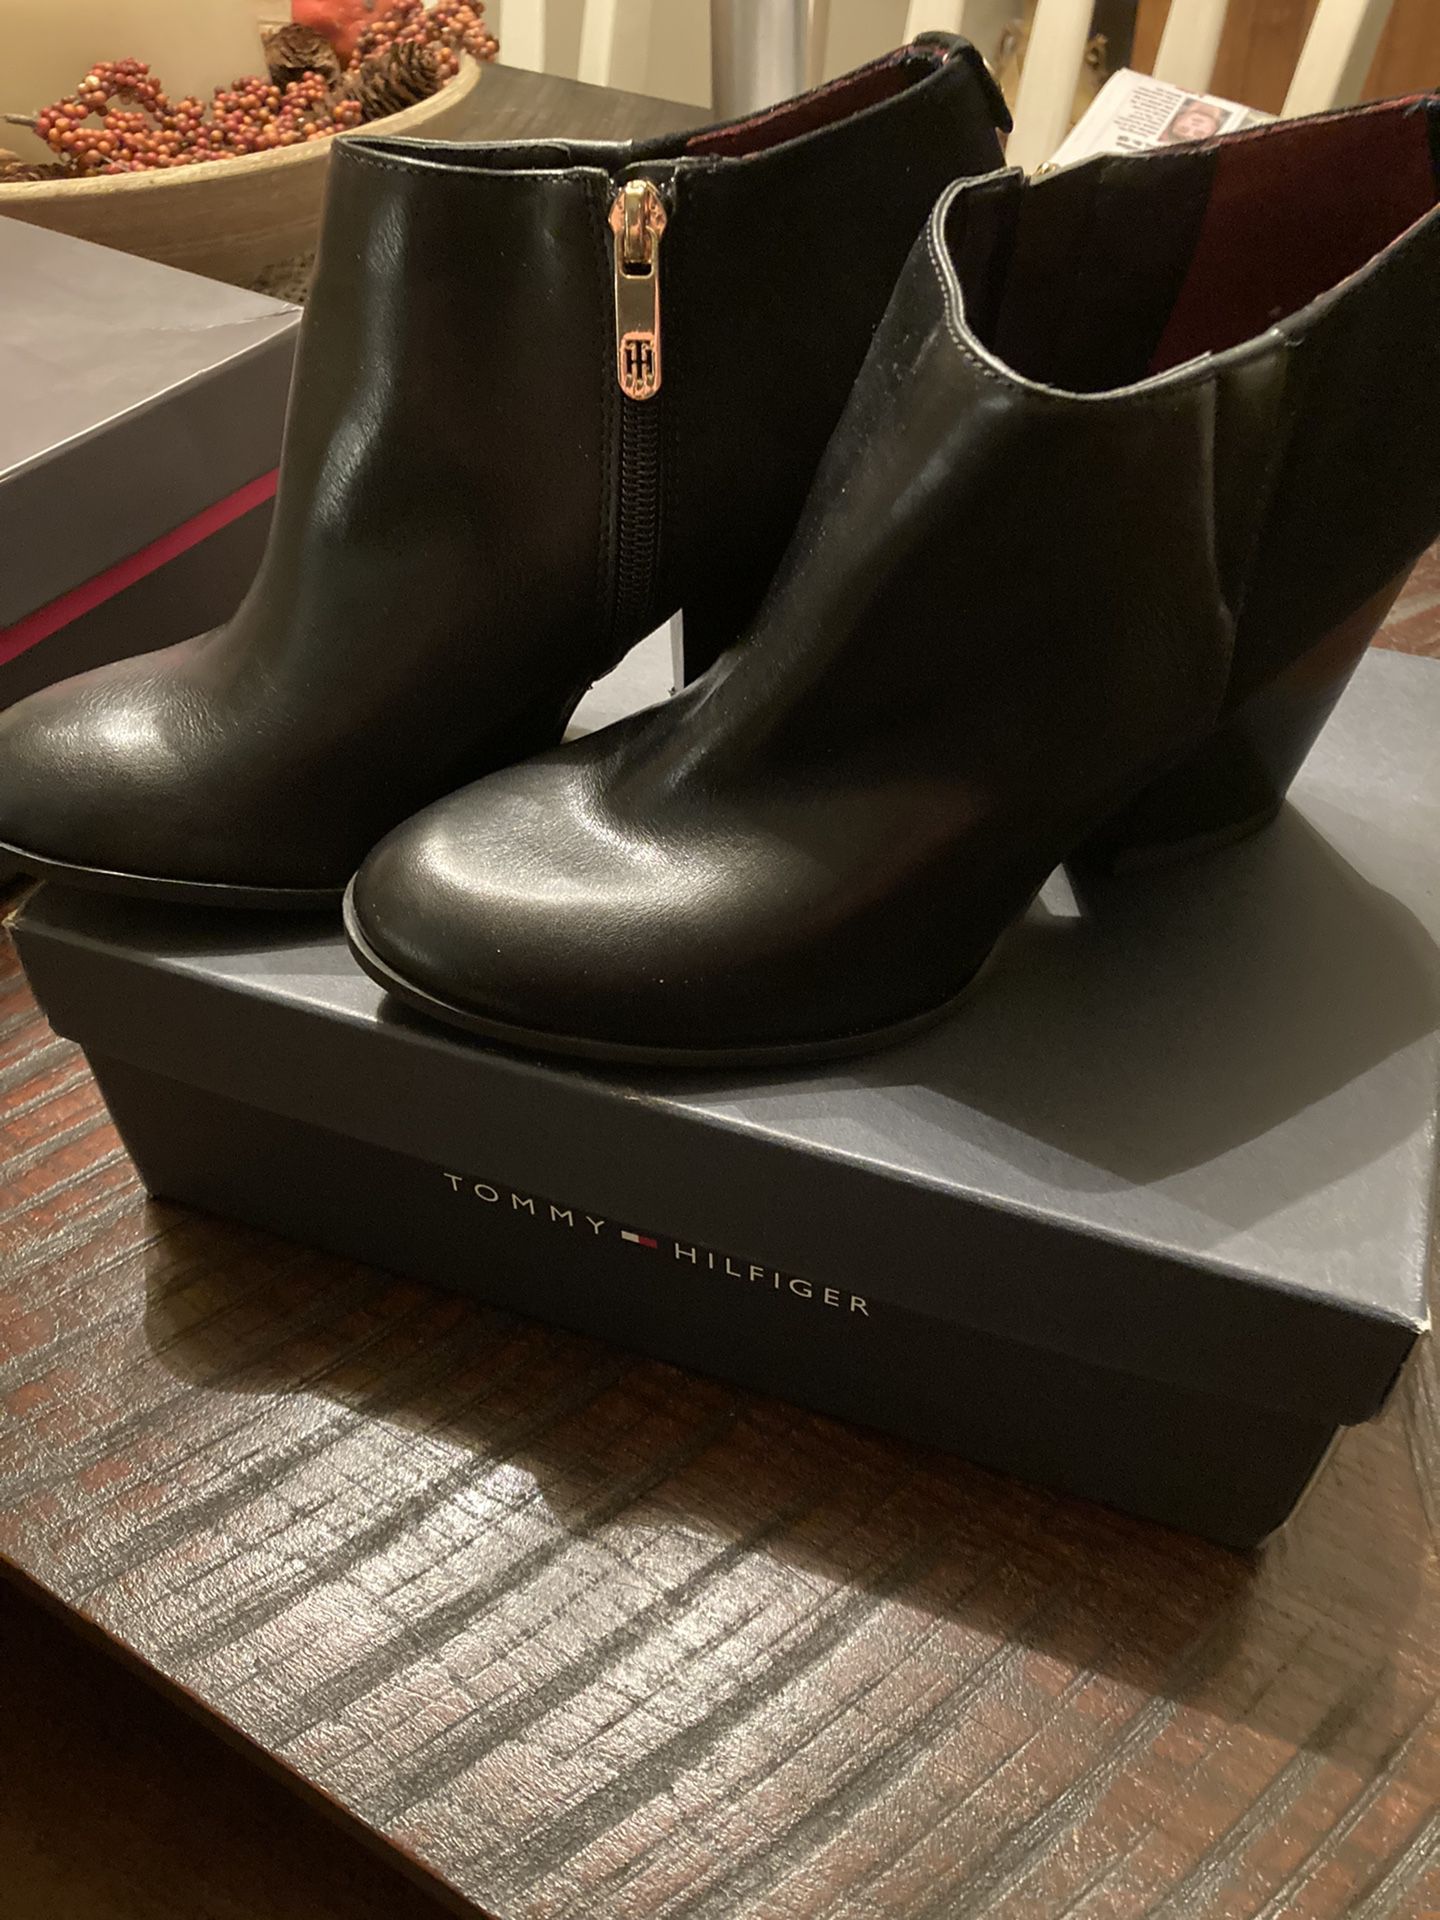 Tommy Hilfiger Women’s Boots 